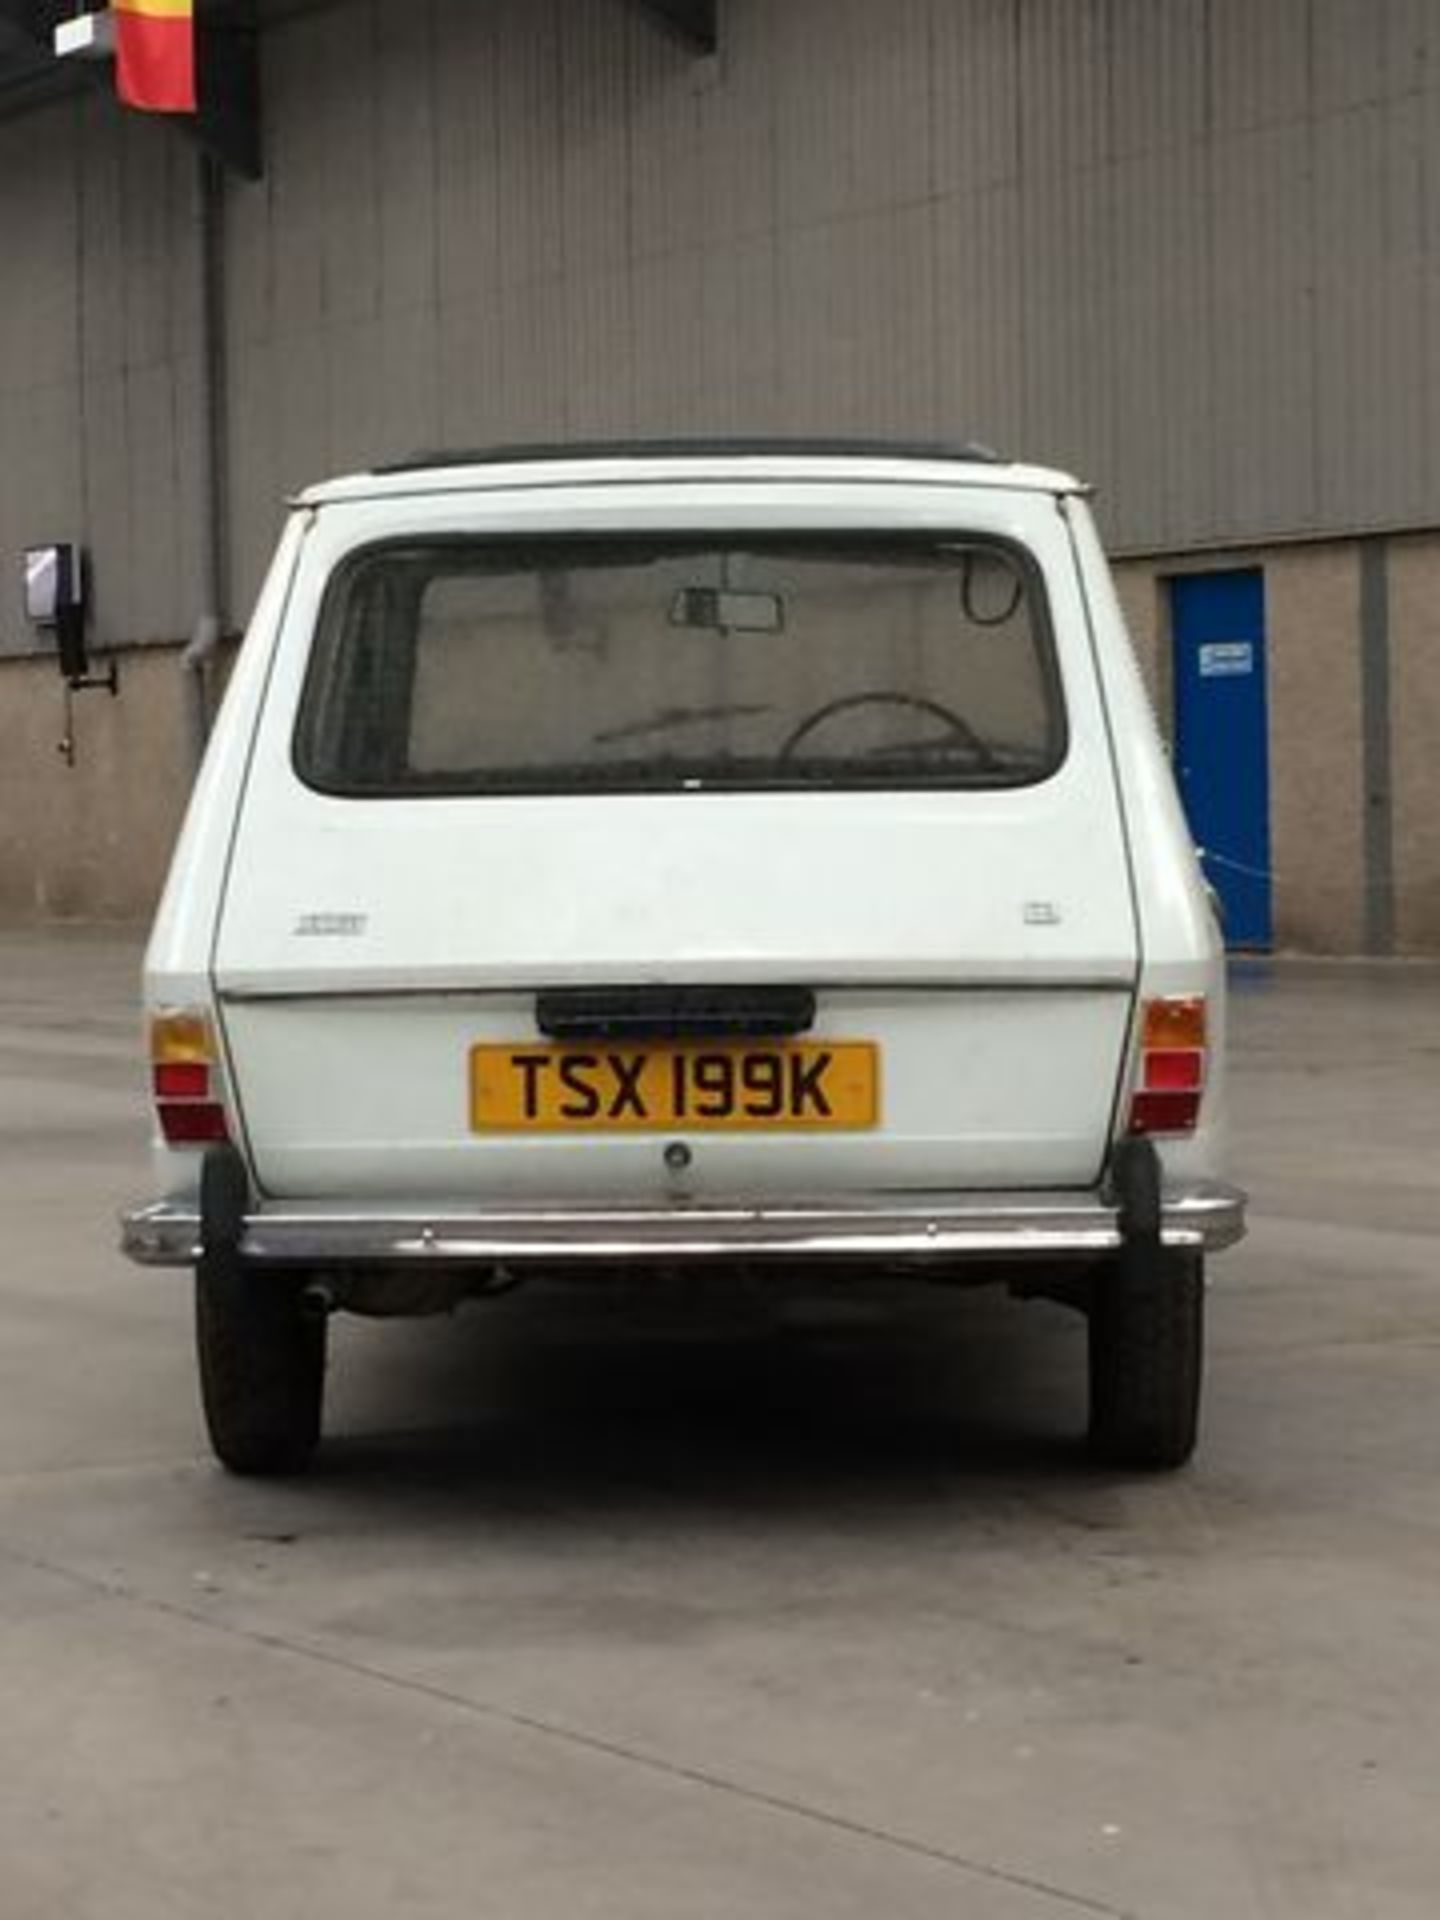 RENAULT 6 TL - 1108cc - Image 2 of 17